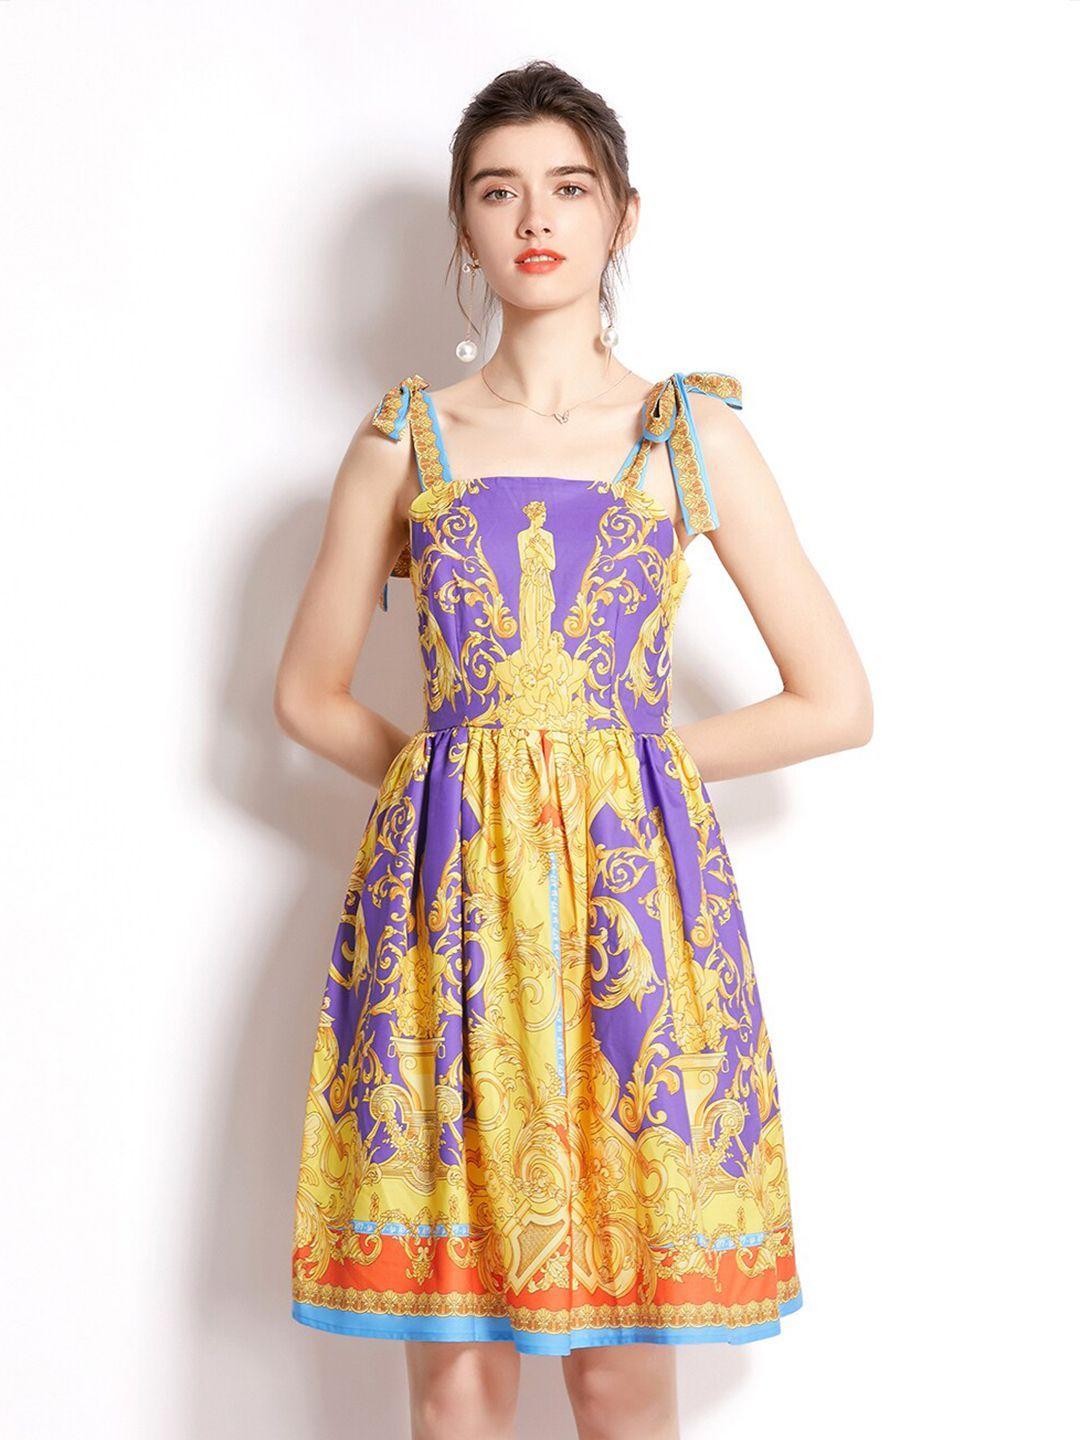 jc collection yellow floral dress